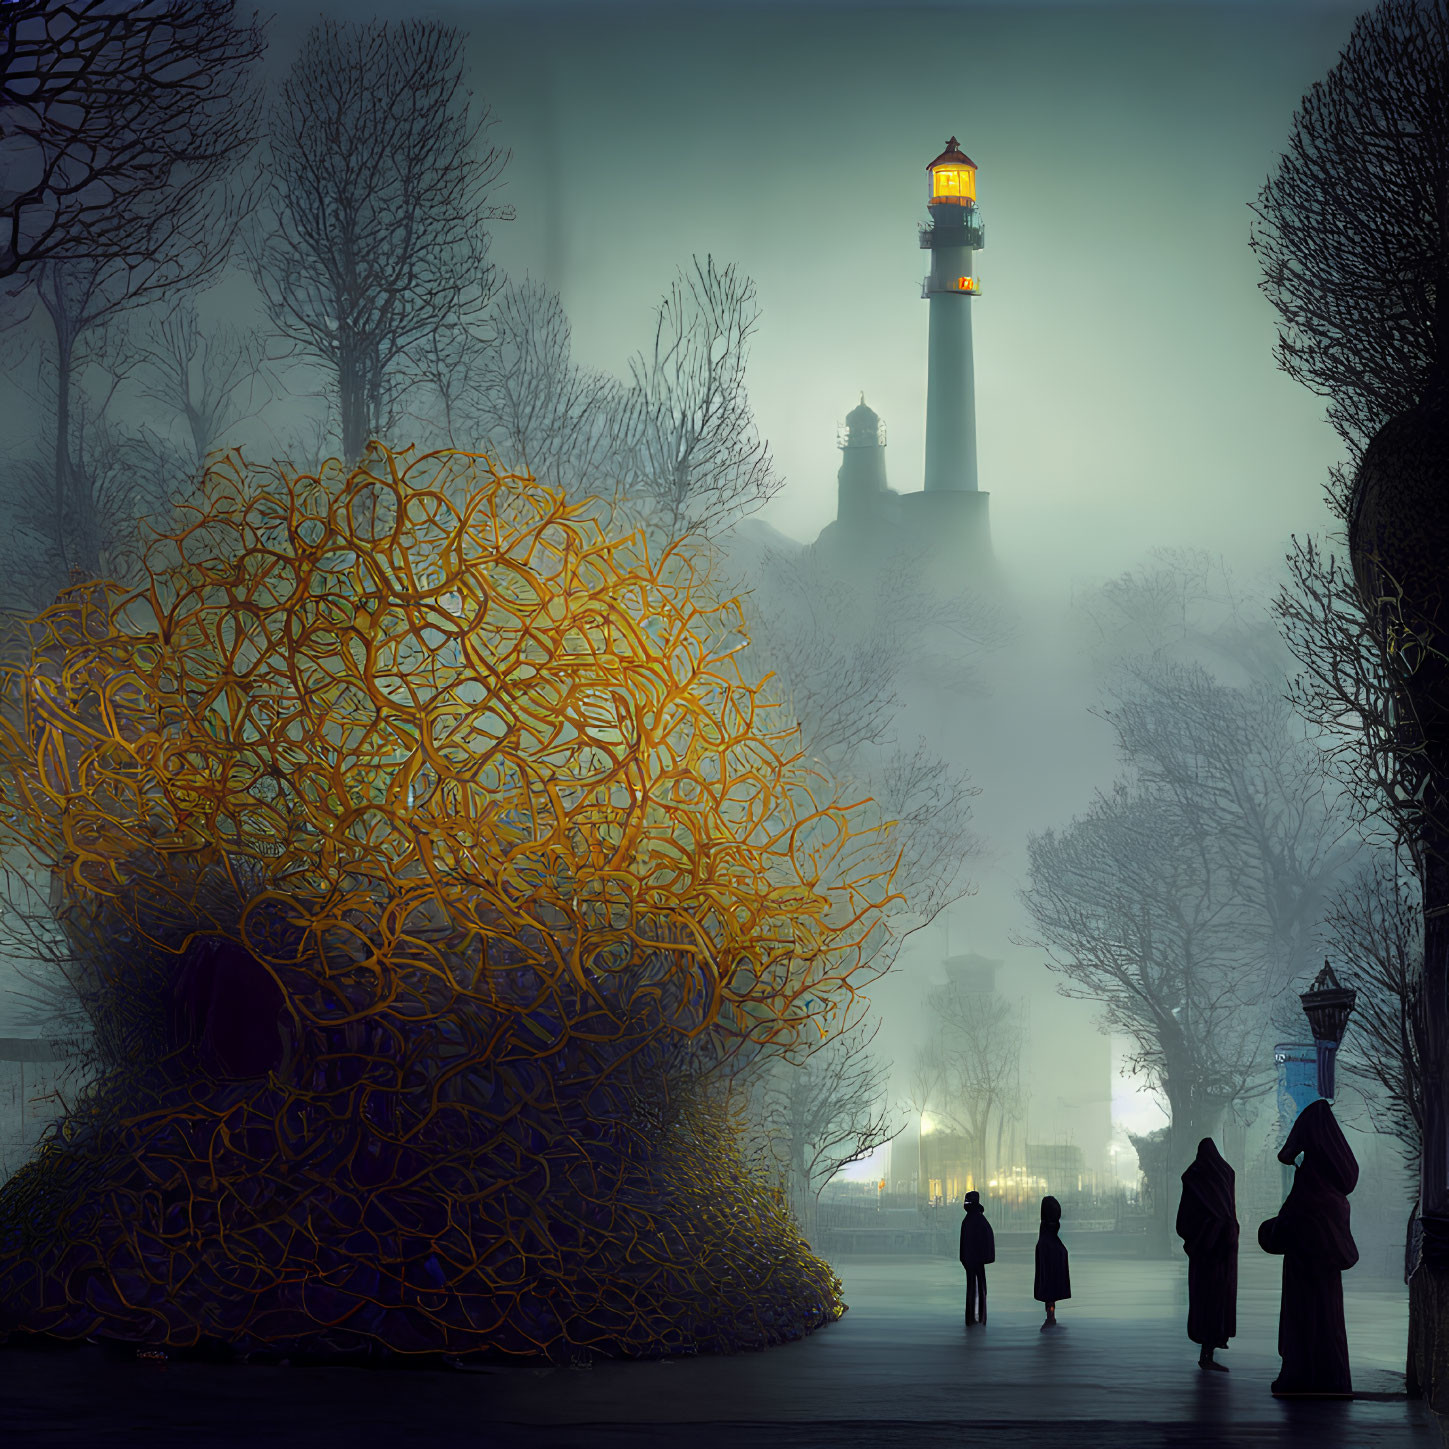 Misty scene with yellow sculpture, glowing lighthouse, and silhouetted figures.